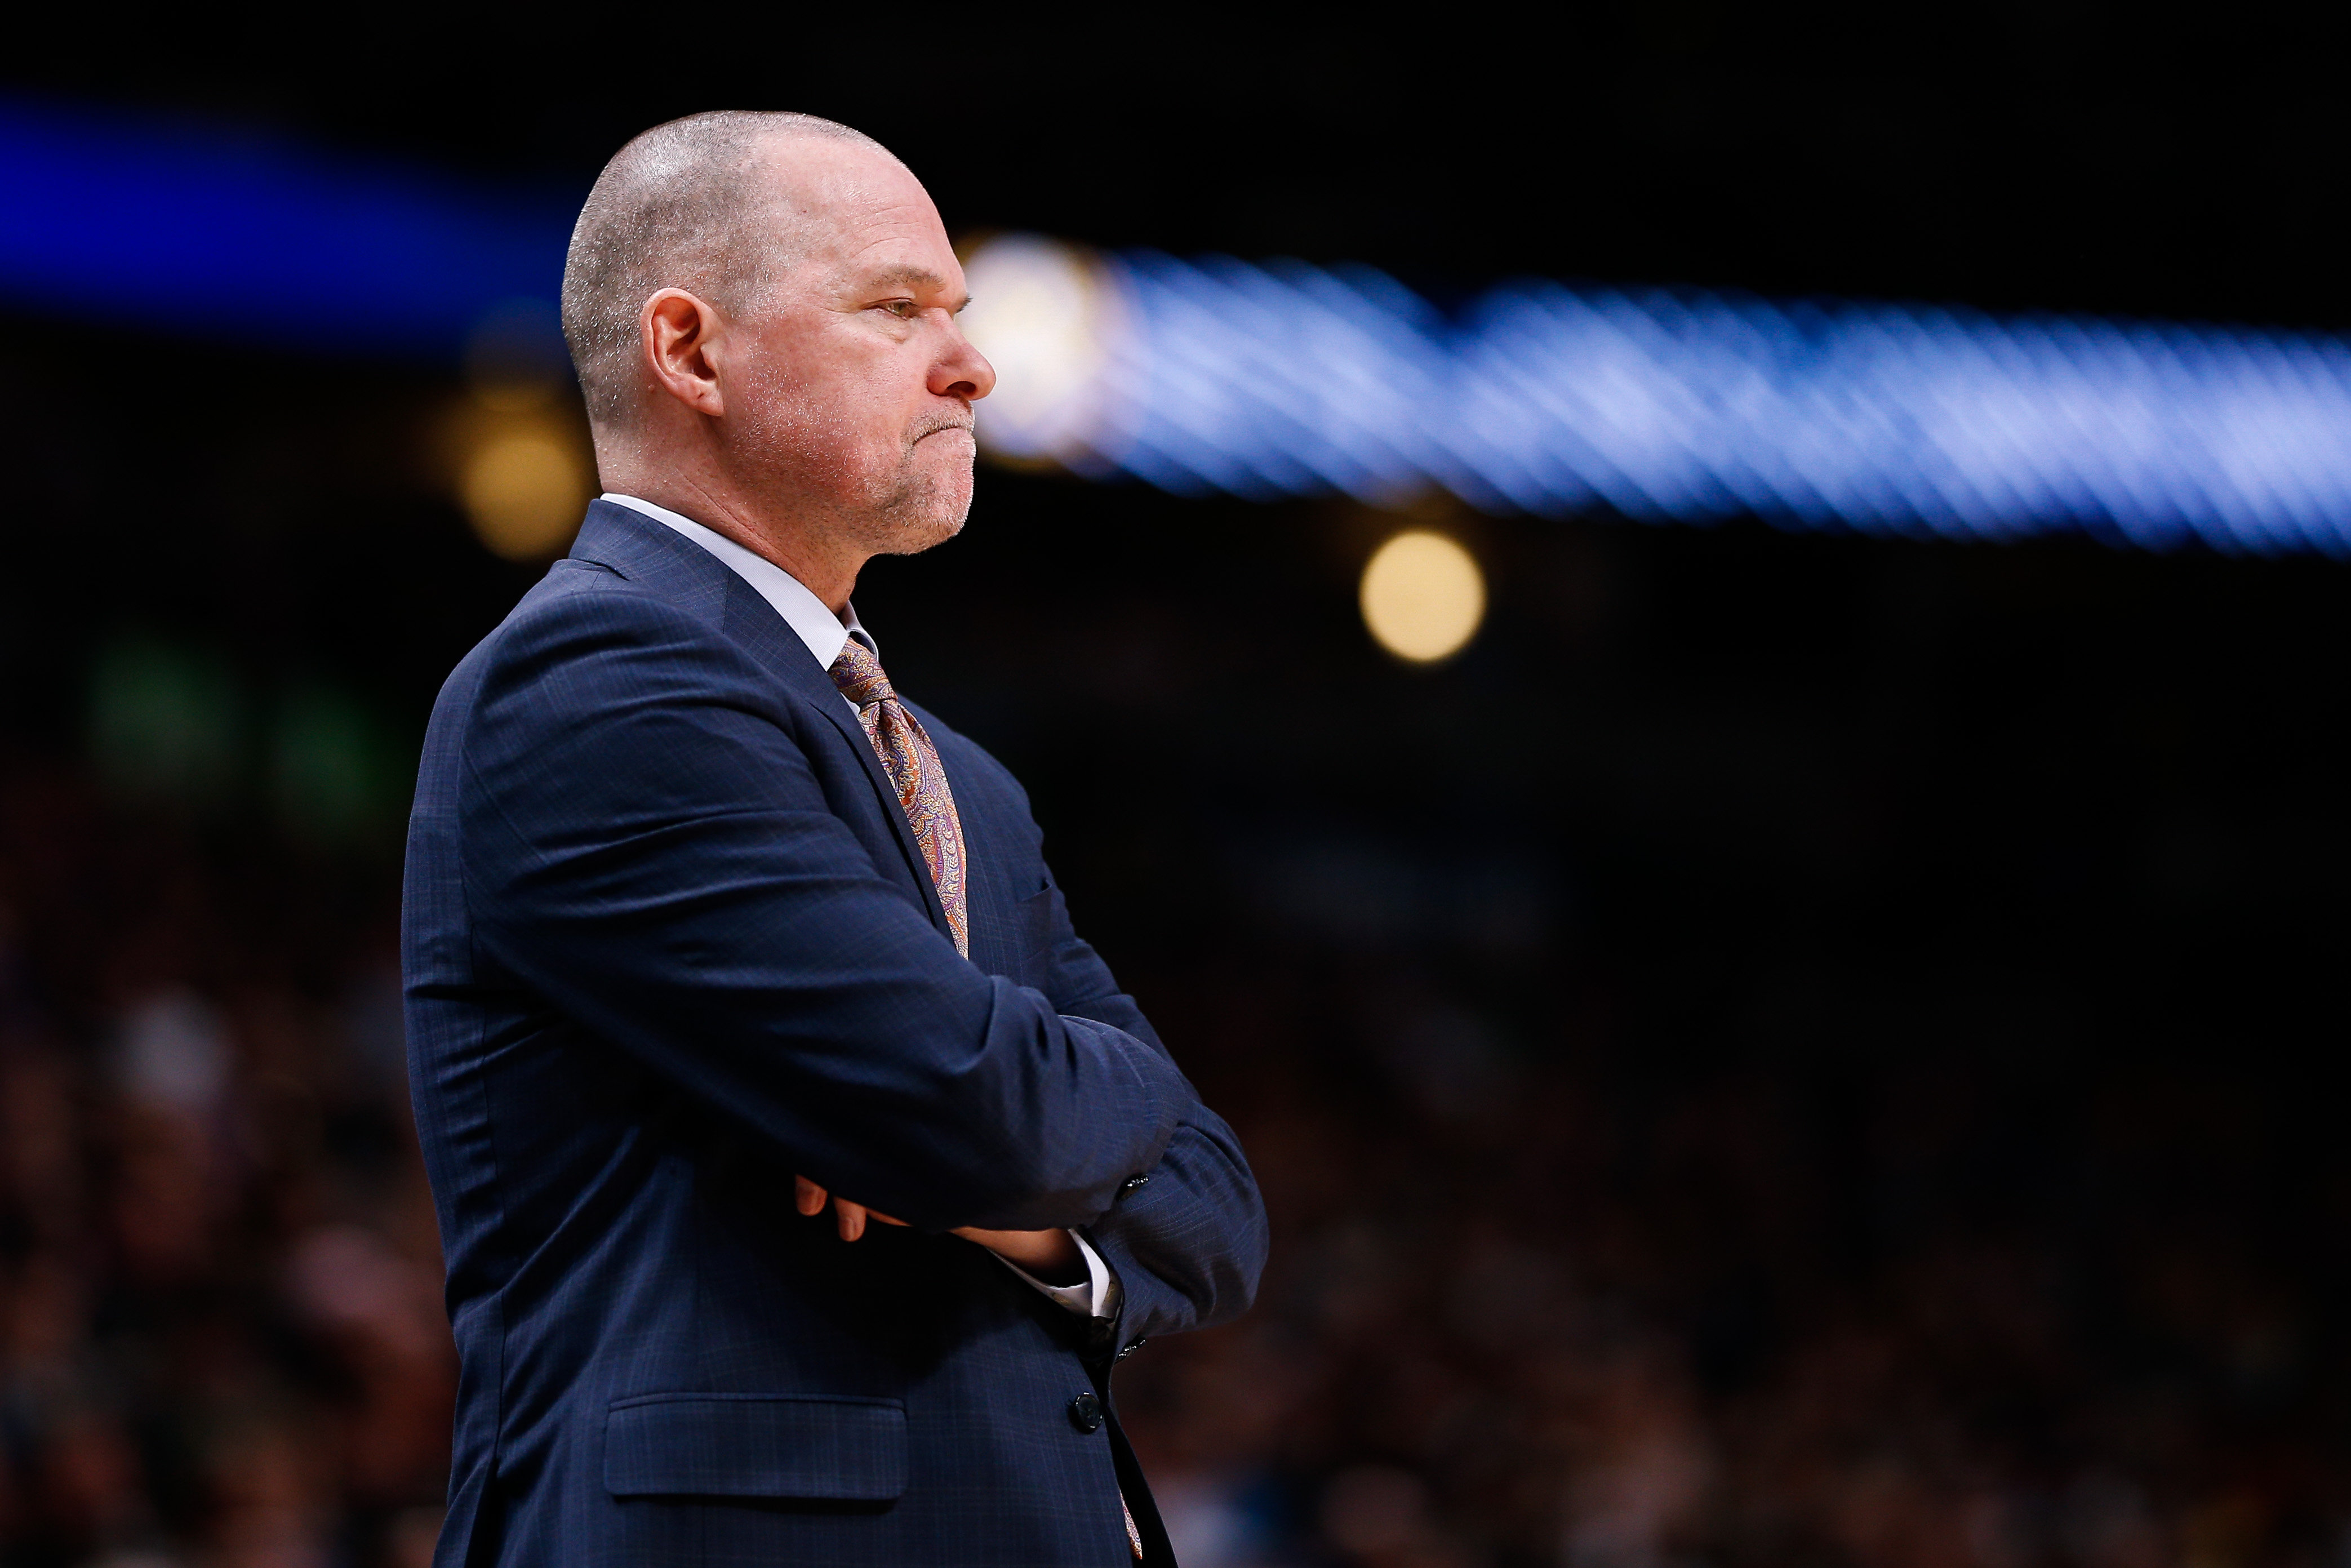 Denver Nuggets head coach Michael Malone looks on in the fourth quarter against the Golden State Warriors at the Pepsi Center.